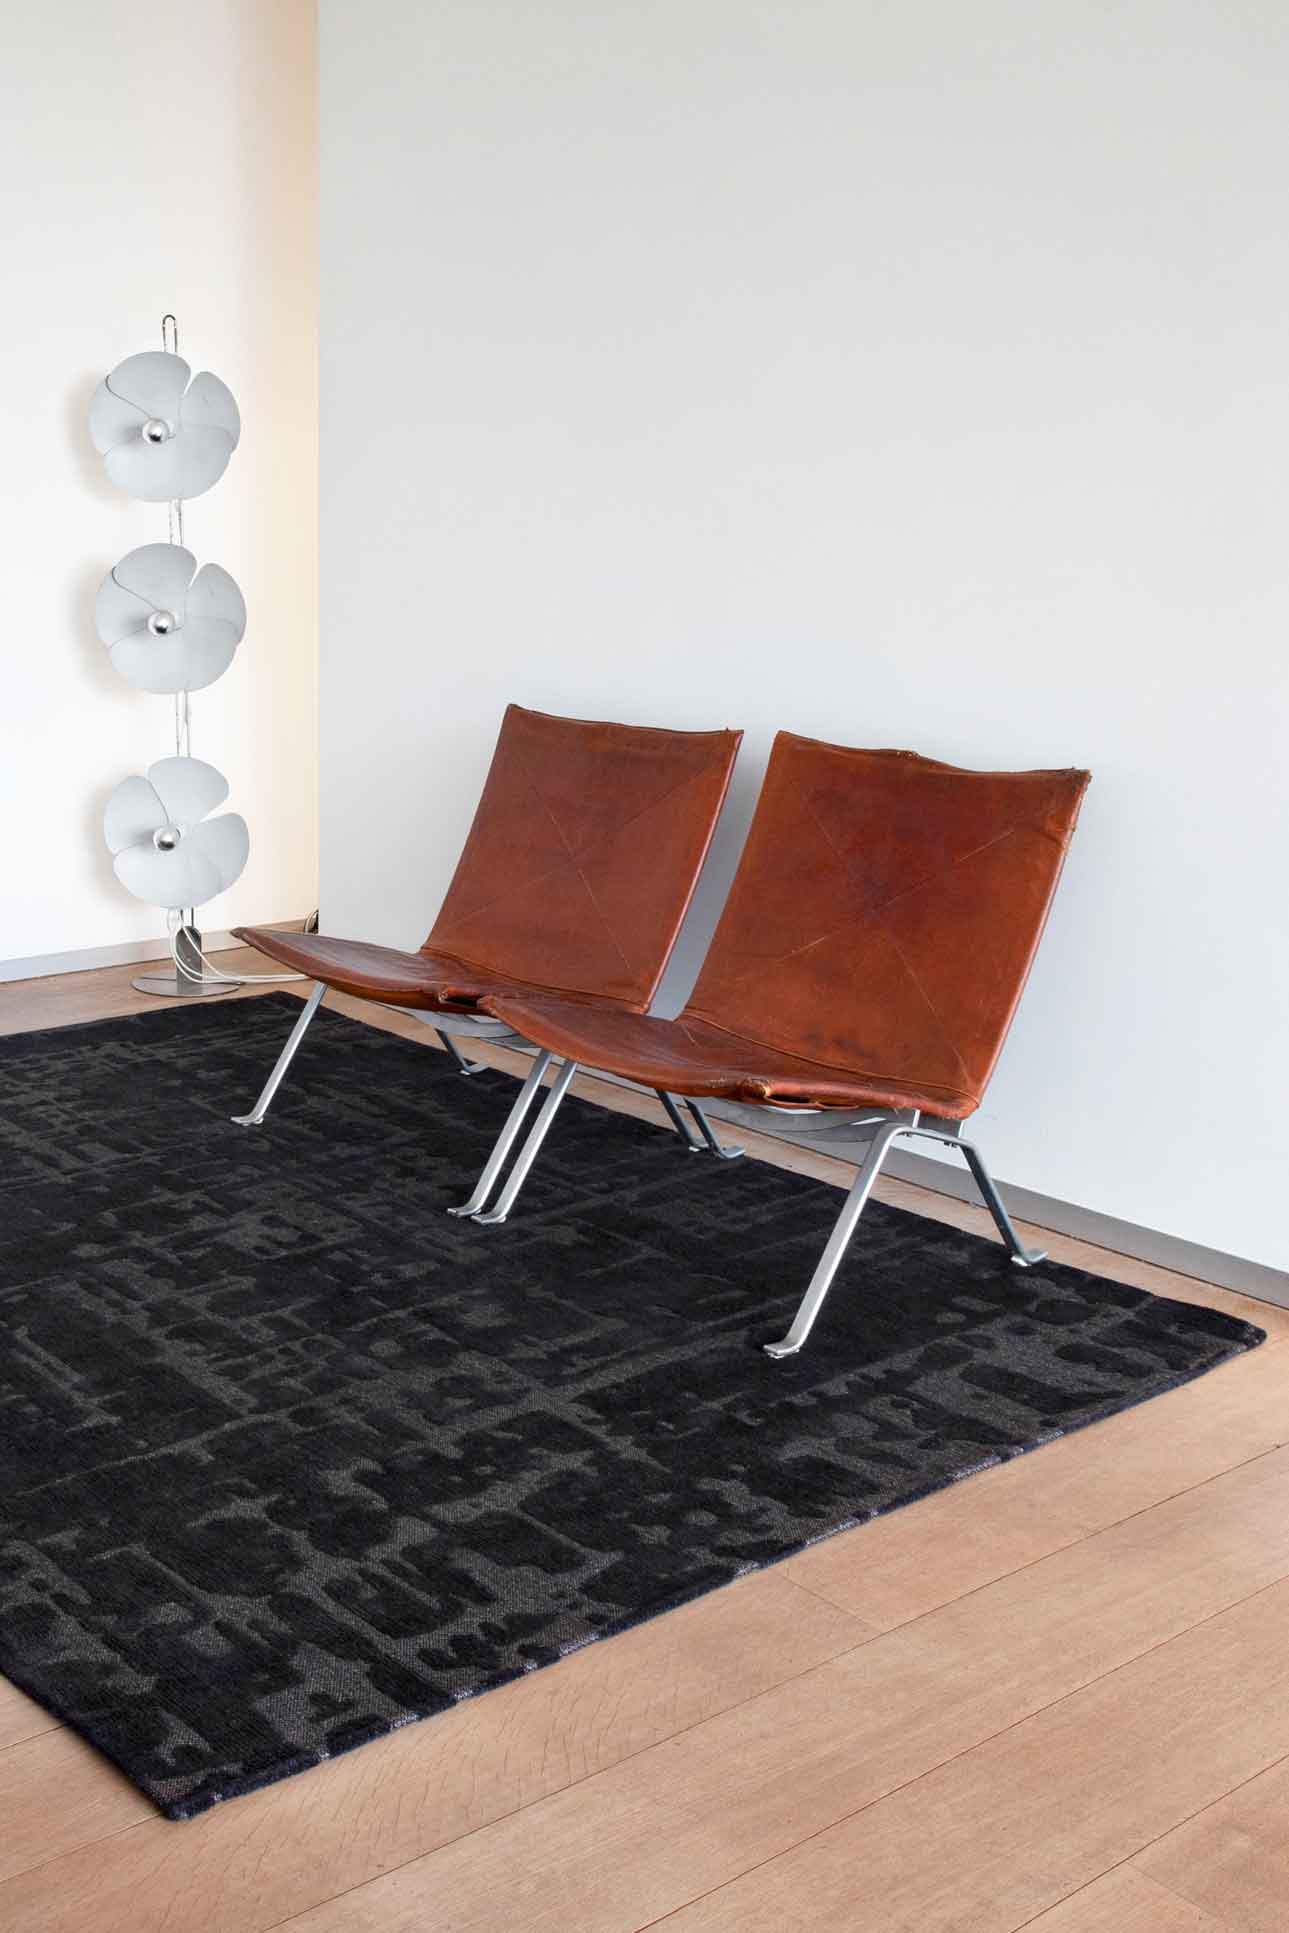 Abstract Black Belgian Rug ☞ Size: 6' 7" x 9' 2" (200 x 280 cm)